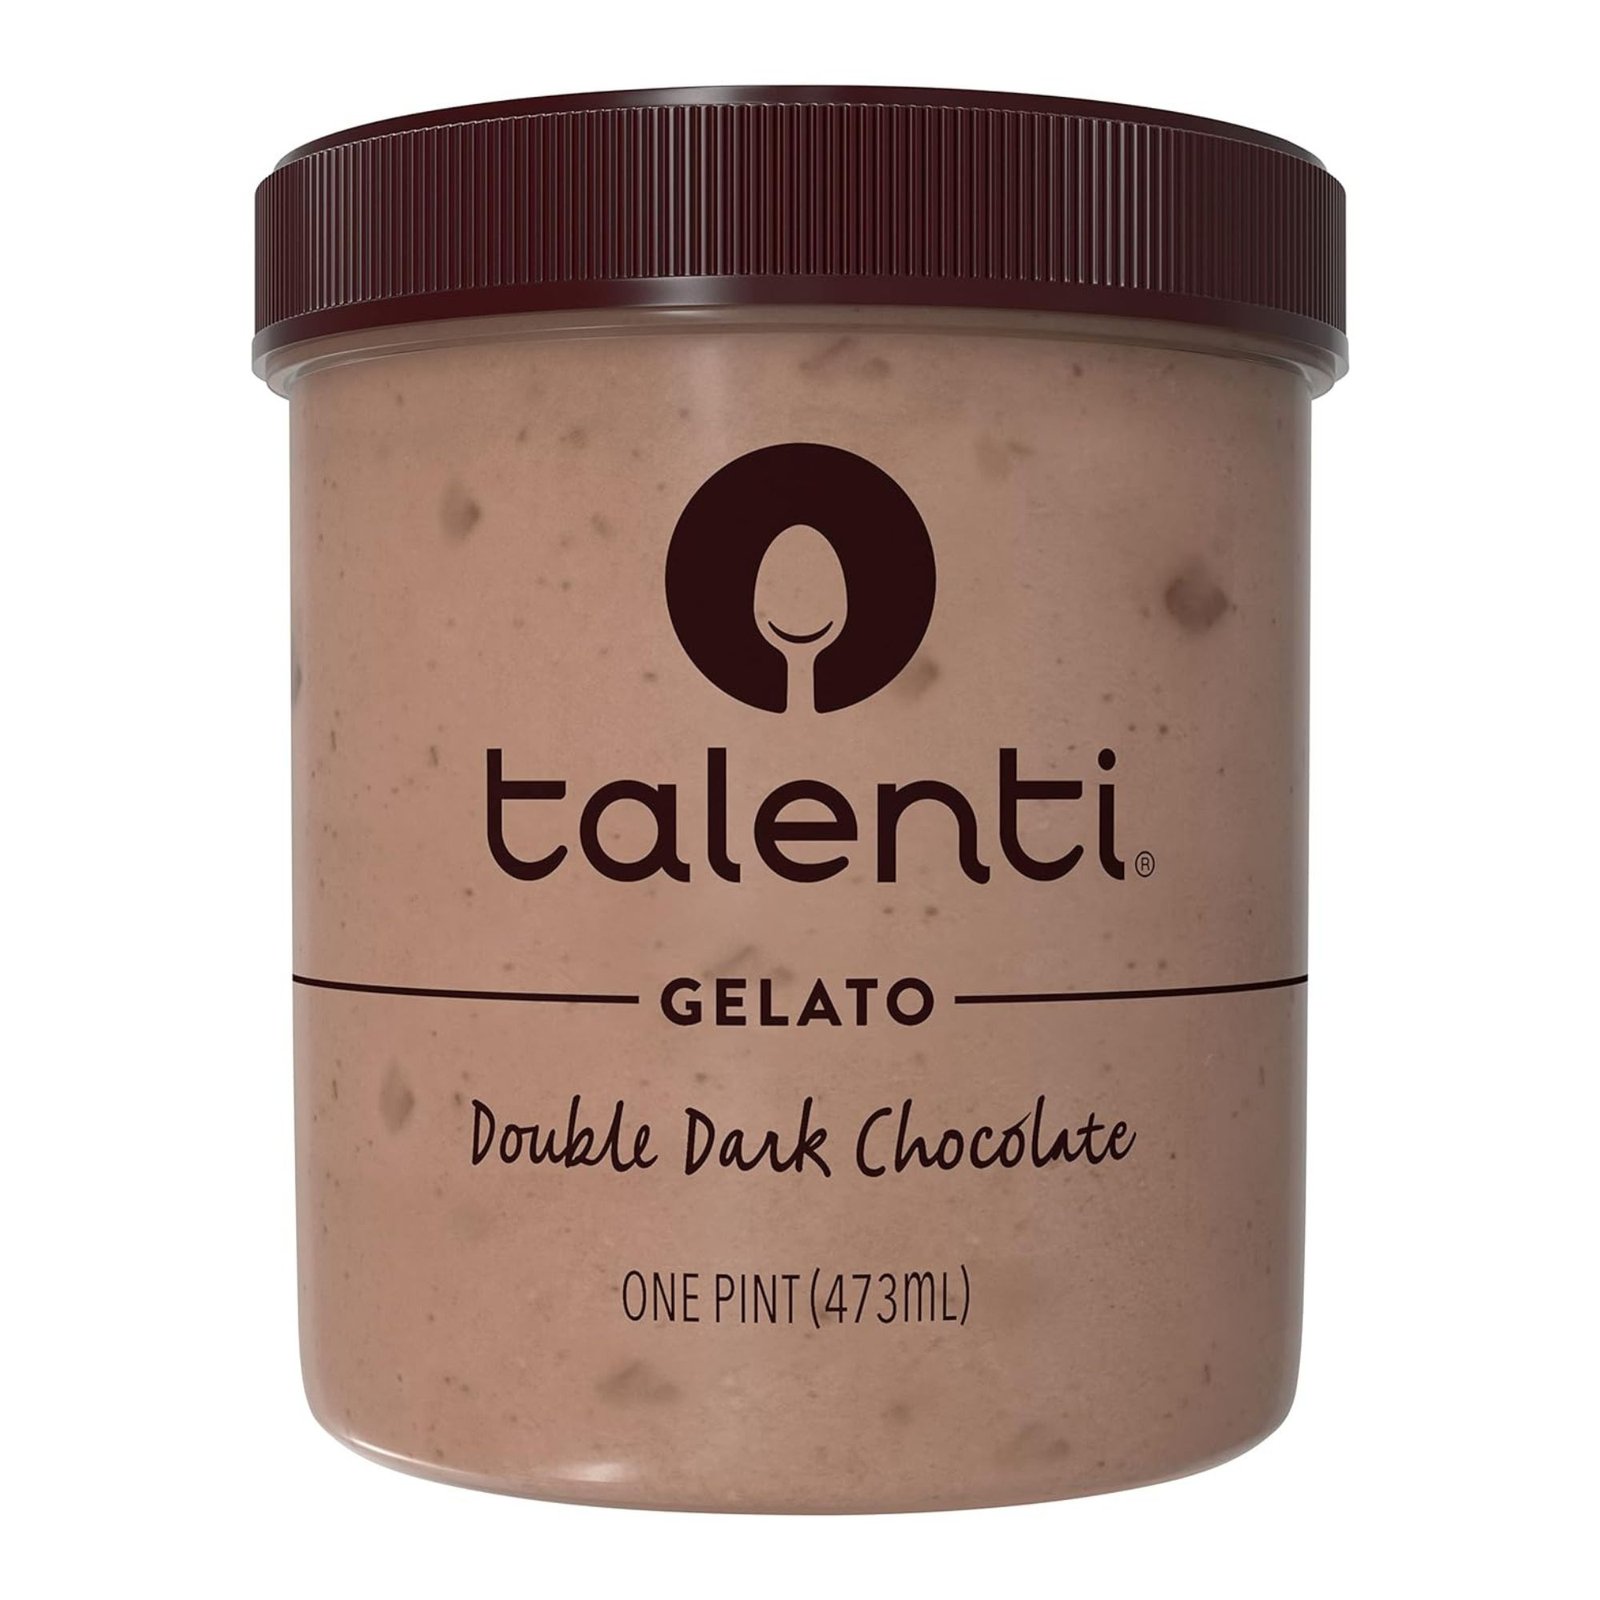 The 10 Best Gluten-Free Ice Creams to Satisfy Your Sweet Tooth Without the Guilt 2